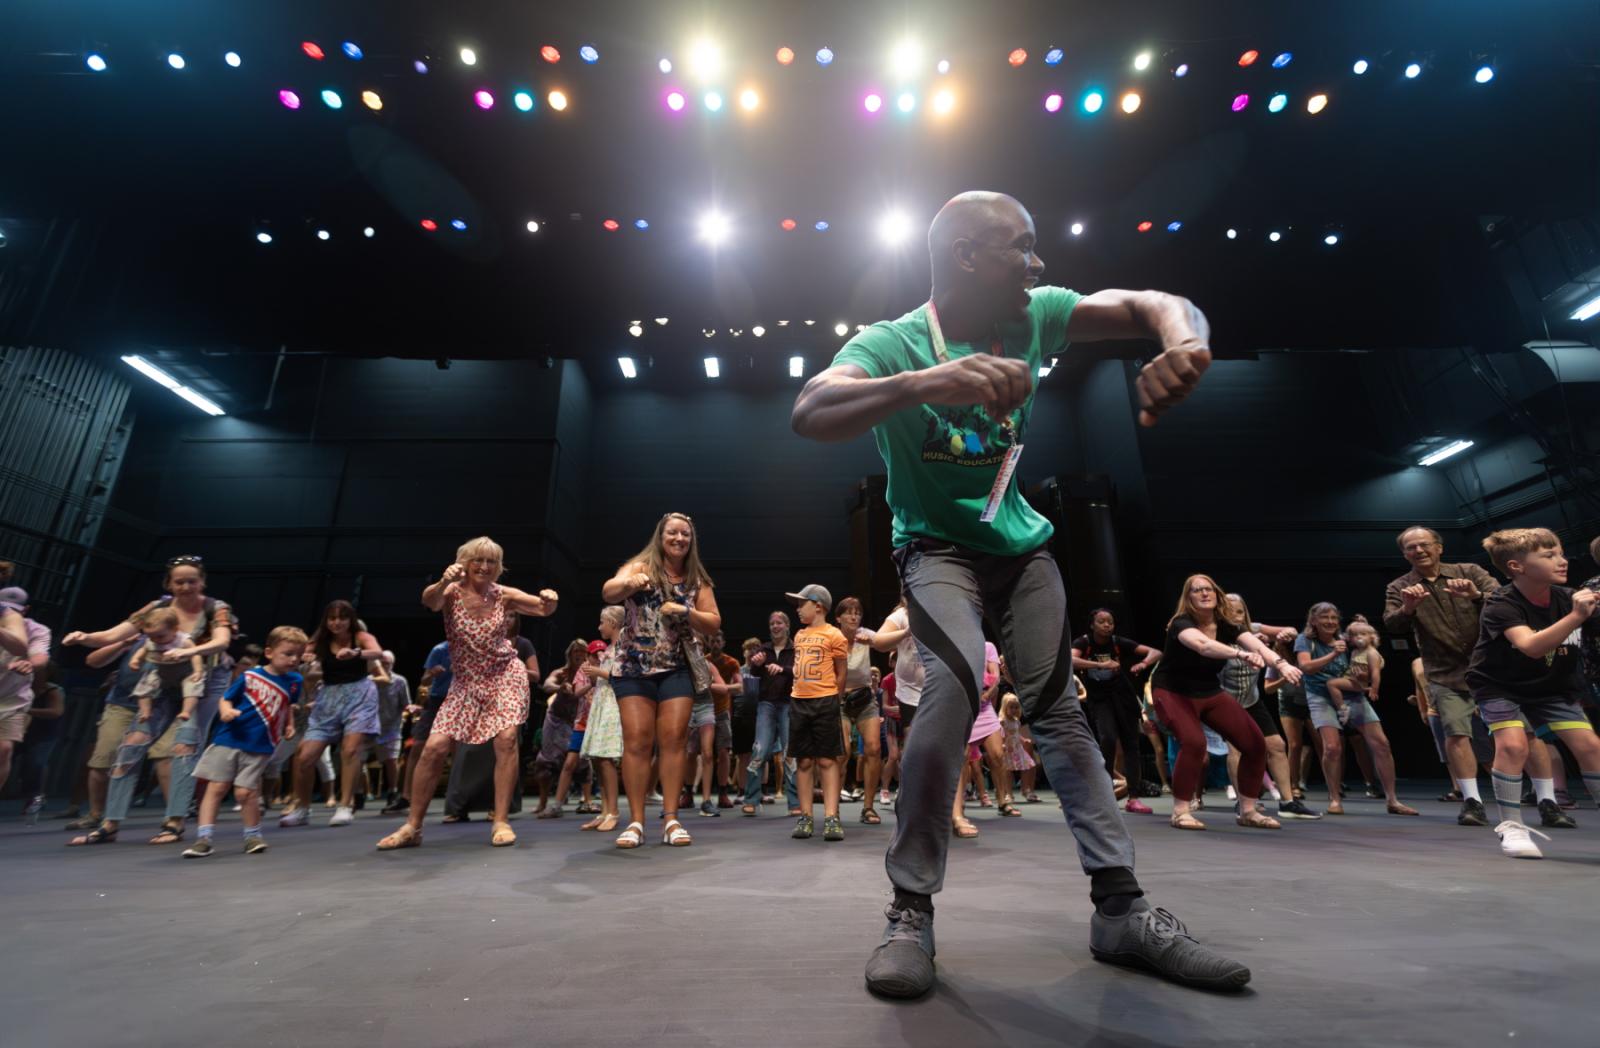 Drumming and dance from Ghana was among the Music Education Team workshops held at the Fox Cities Performing Arts Center.